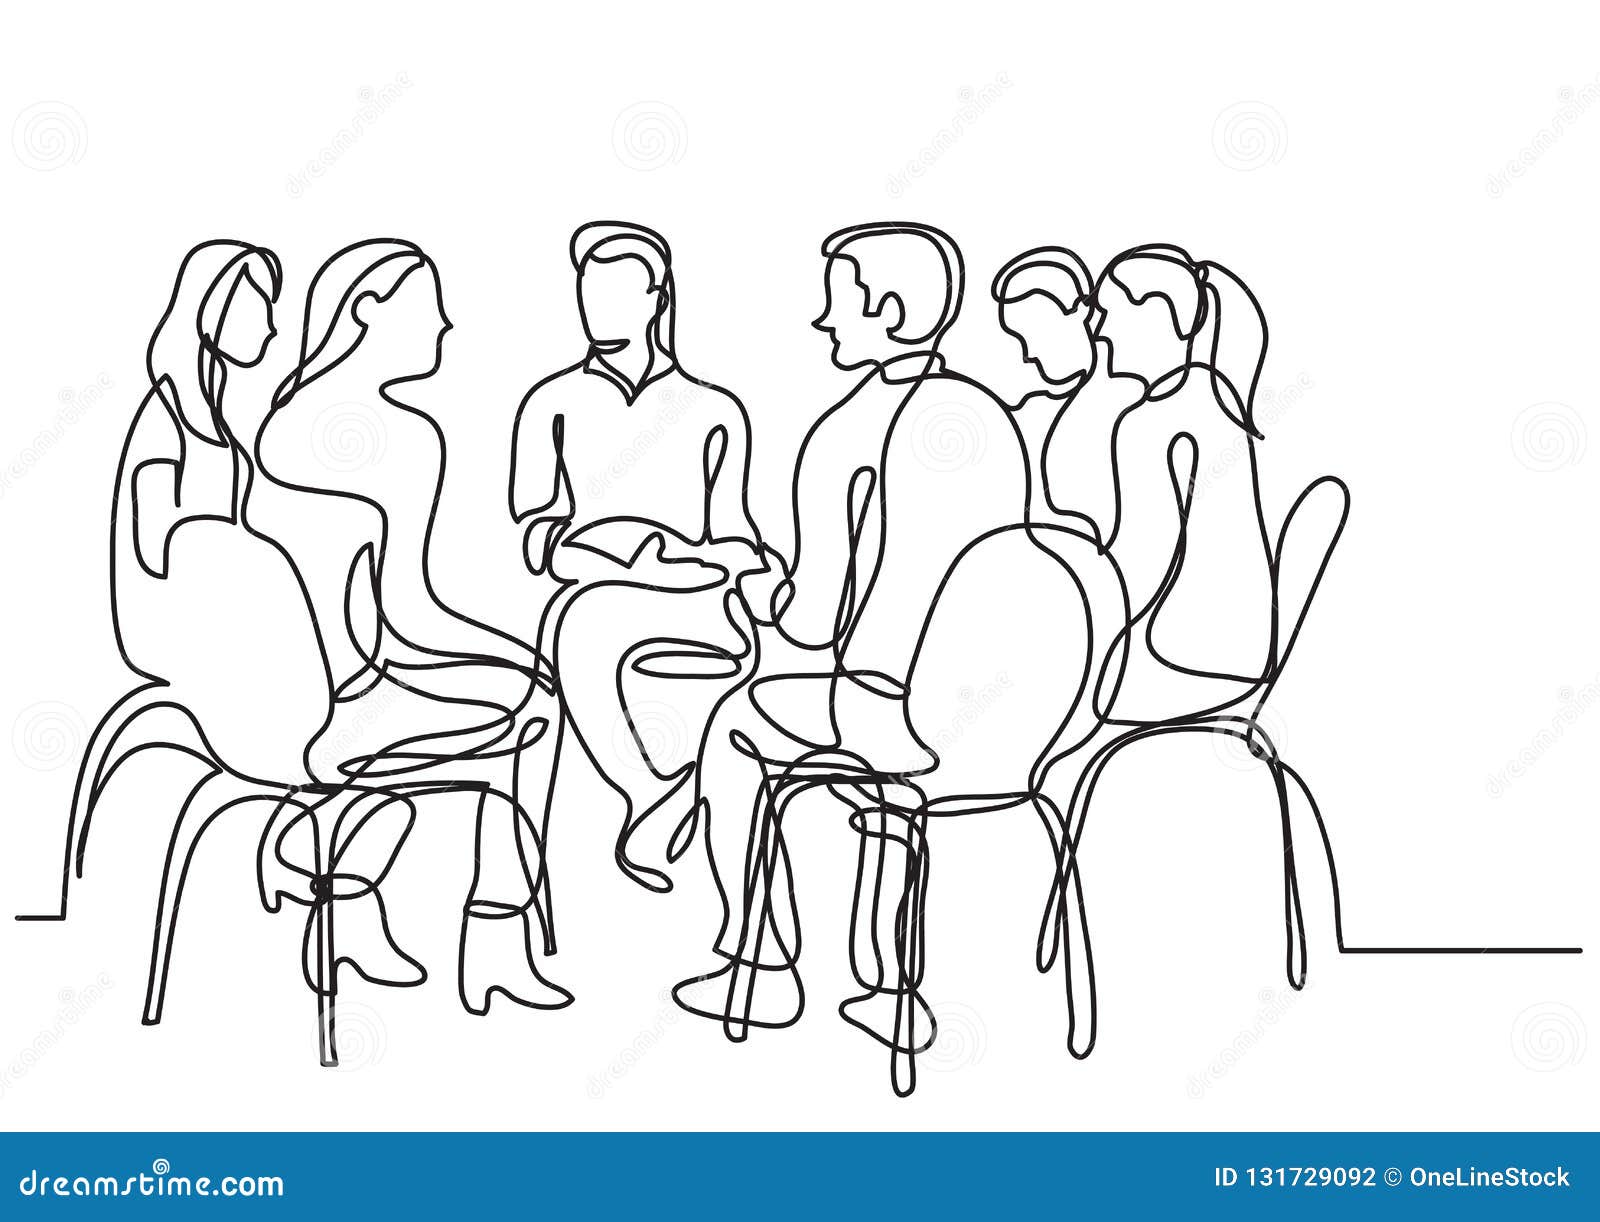 one line drawing of group of young people talking